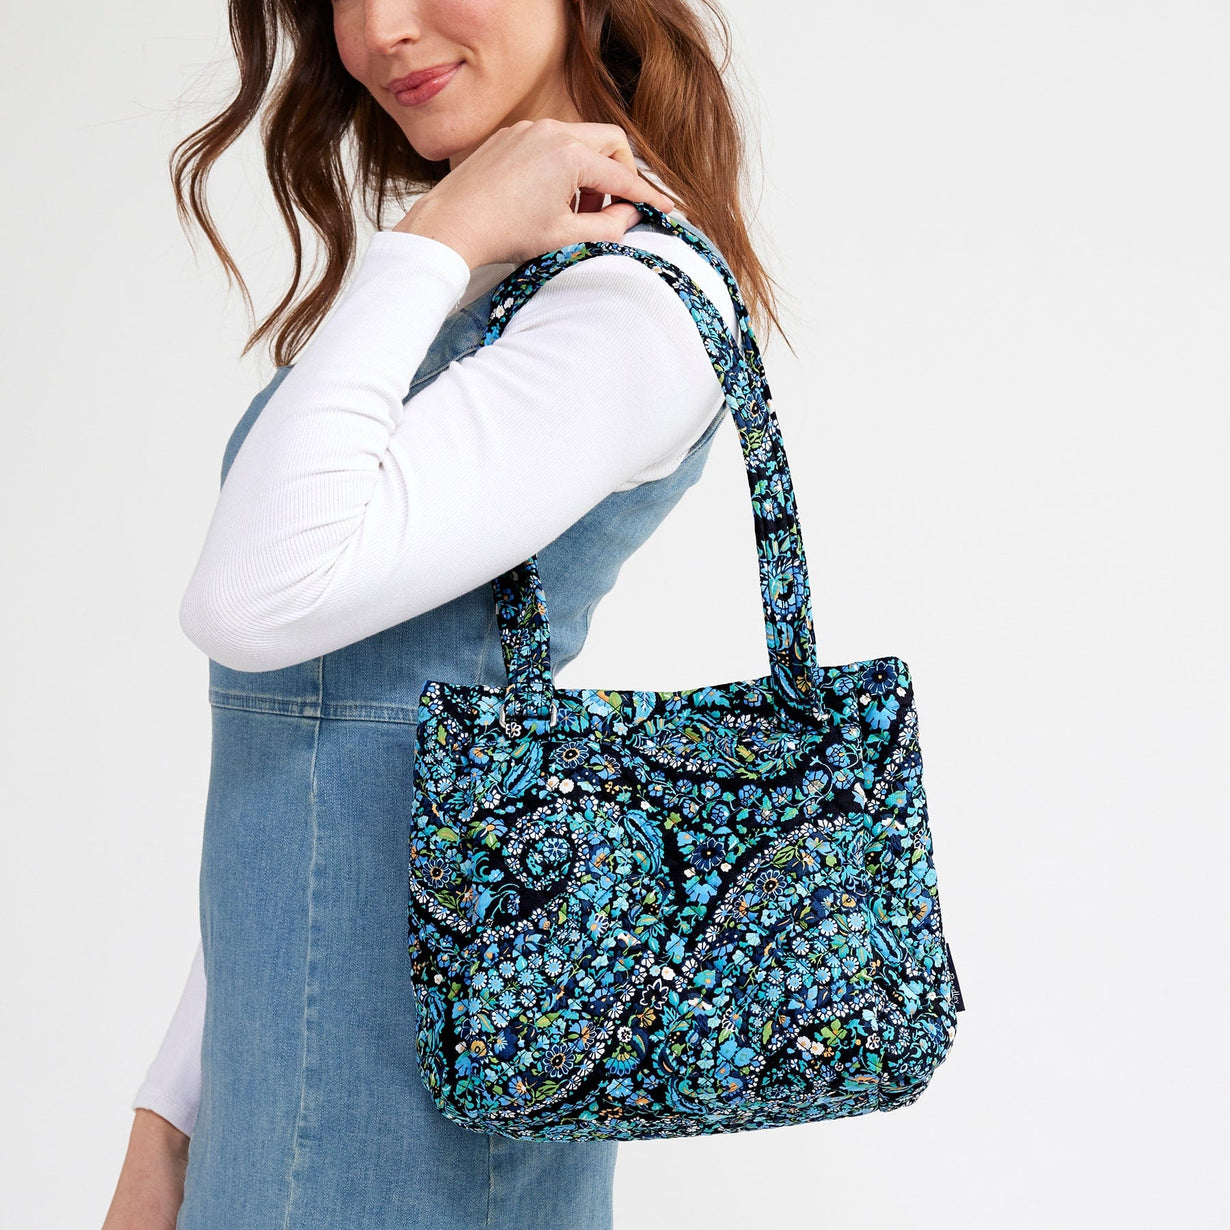  Over The Shoulder Bags For Ladies, Blue Leather Tote Bag With  Zipper, Multiple Compartment, Travel Size